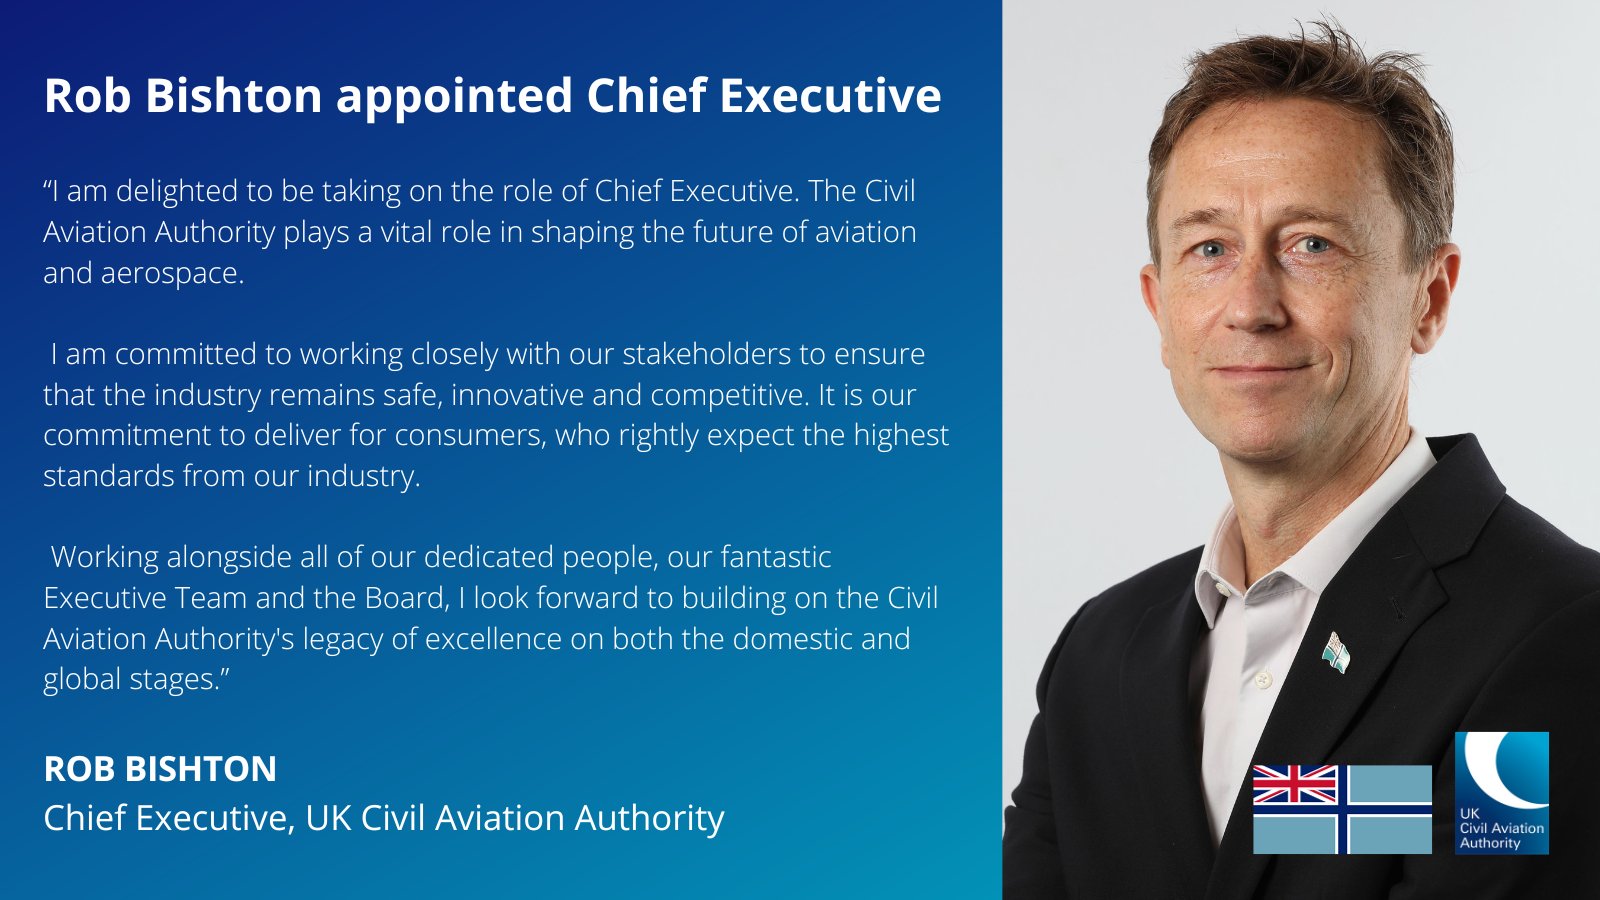 UK Civil Aviation Authority  has a  new  Boss  amid  Air Traffic Control Meltdown Review , will consider “airline and airport costs”.